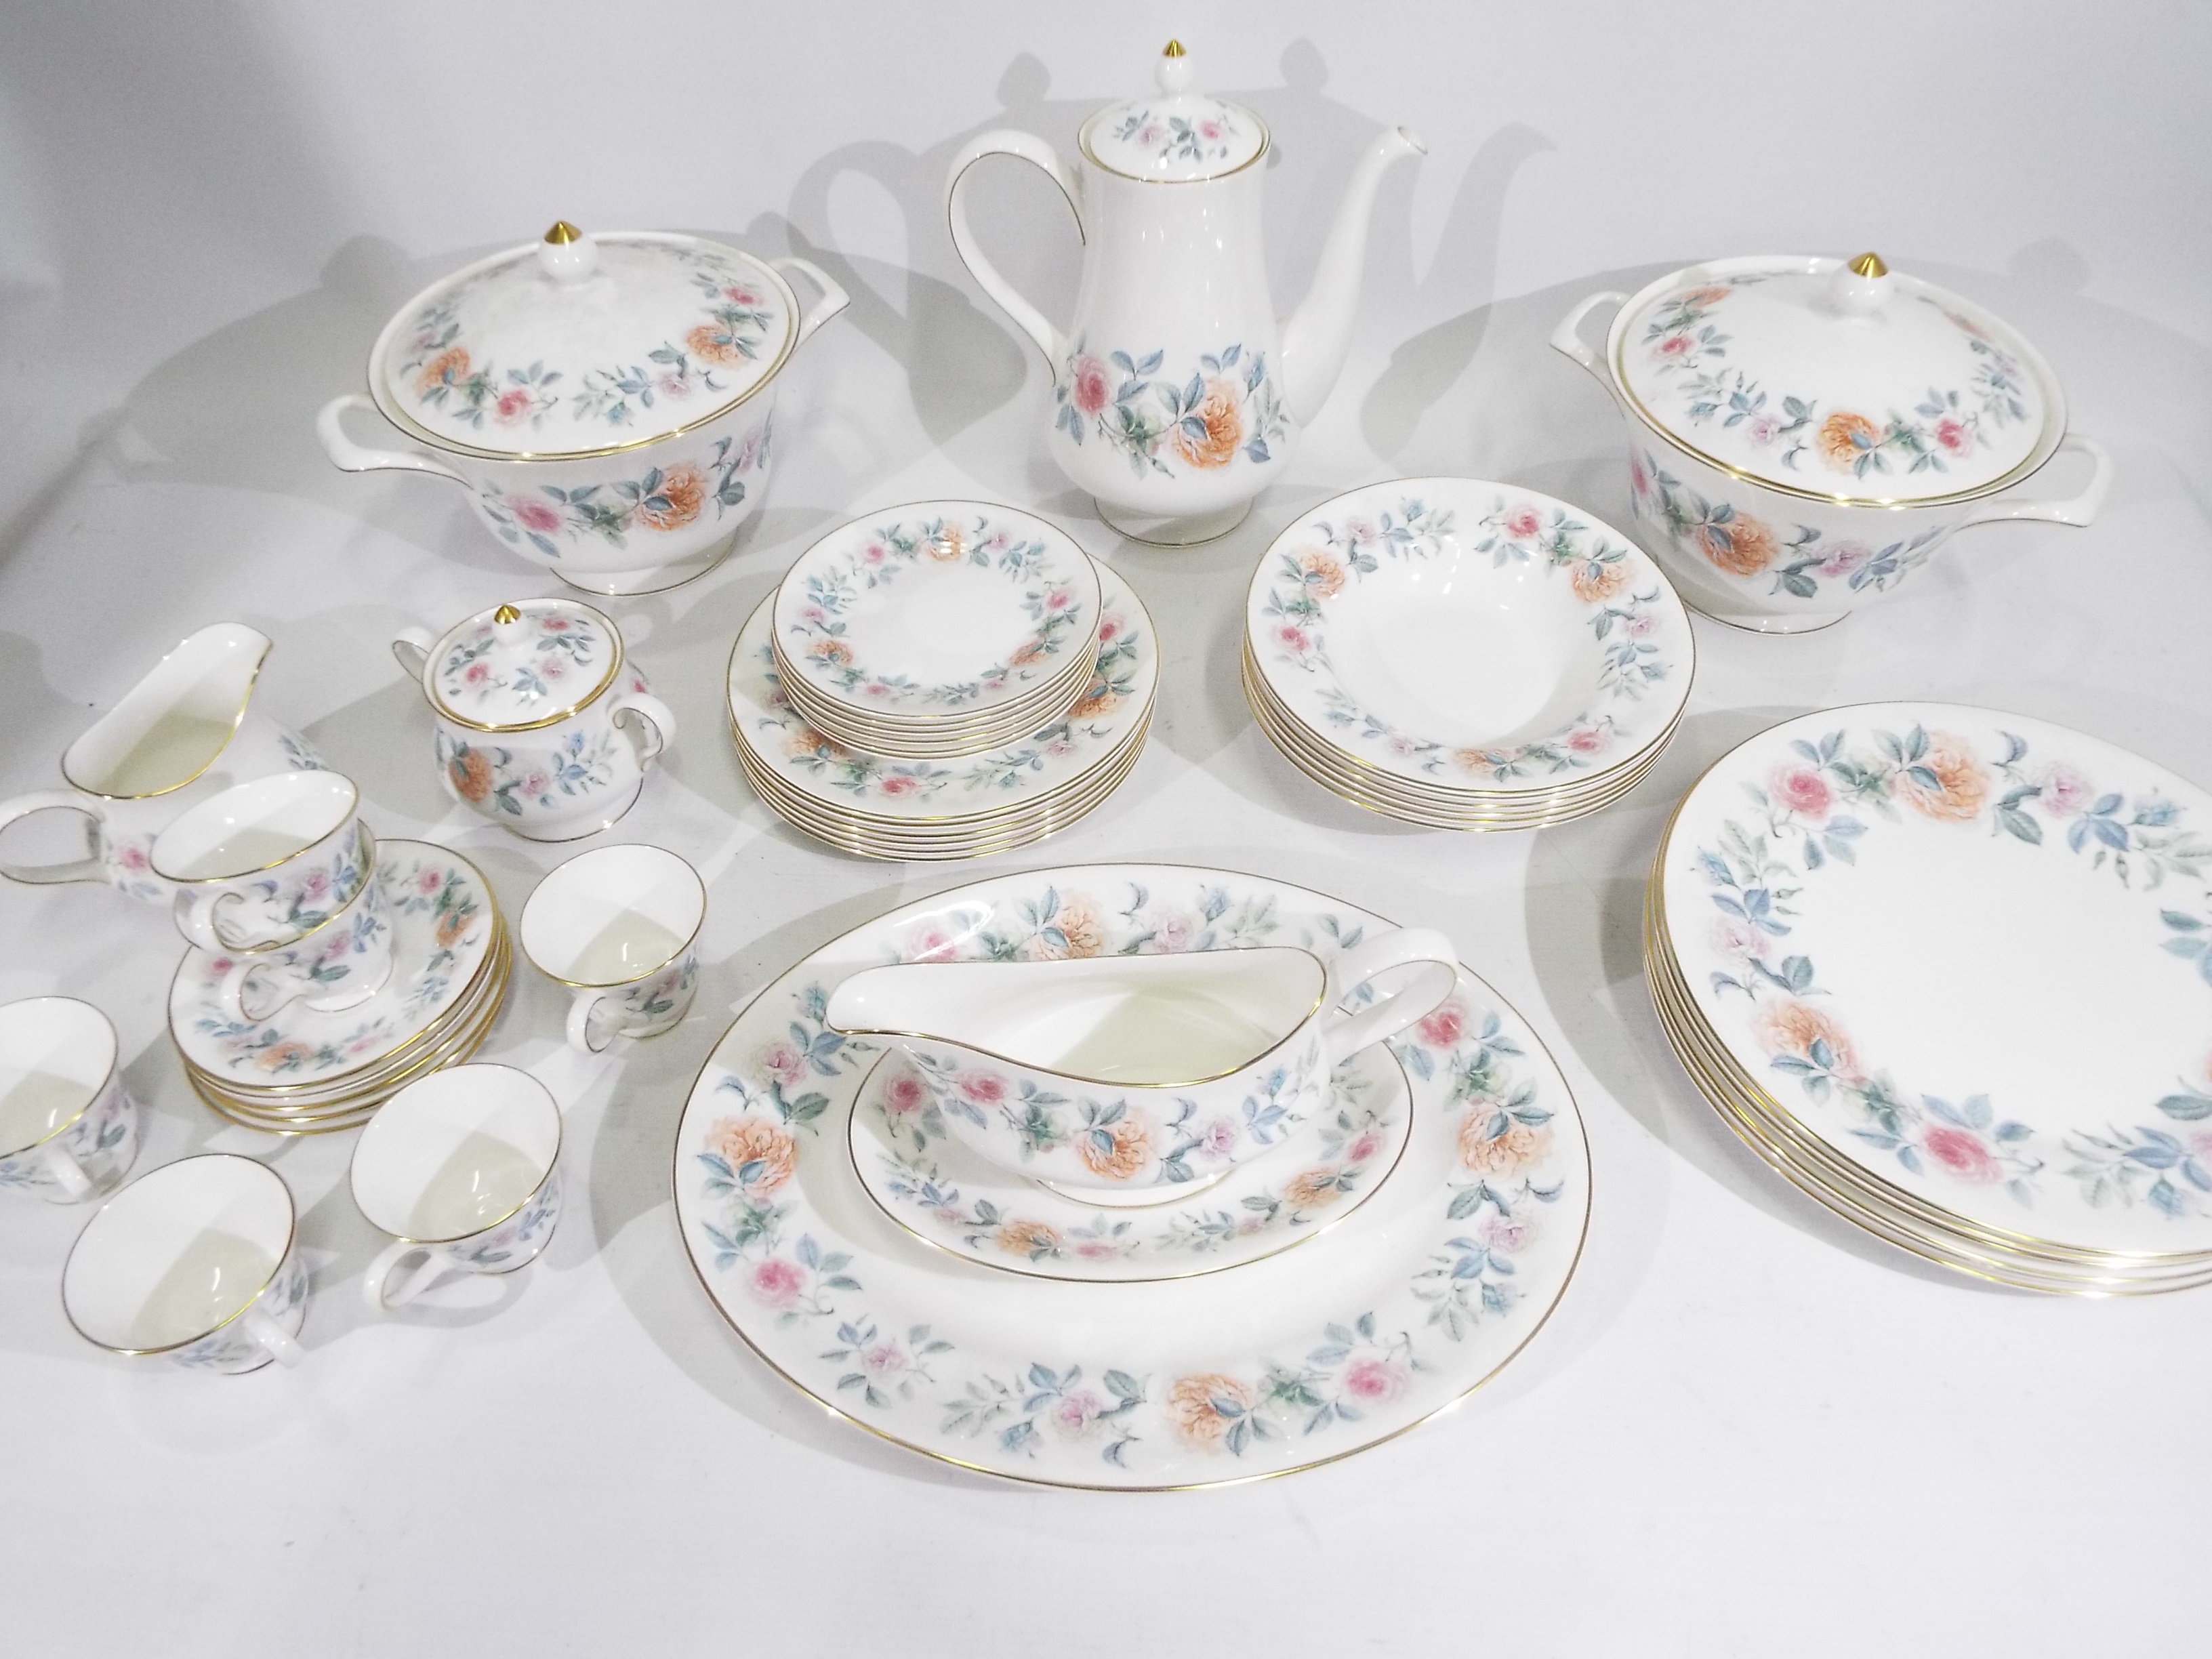 Wedgwood - A collection of dinner and tea wares in the Mist Rose pattern comprising dinner plates, - Image 2 of 5